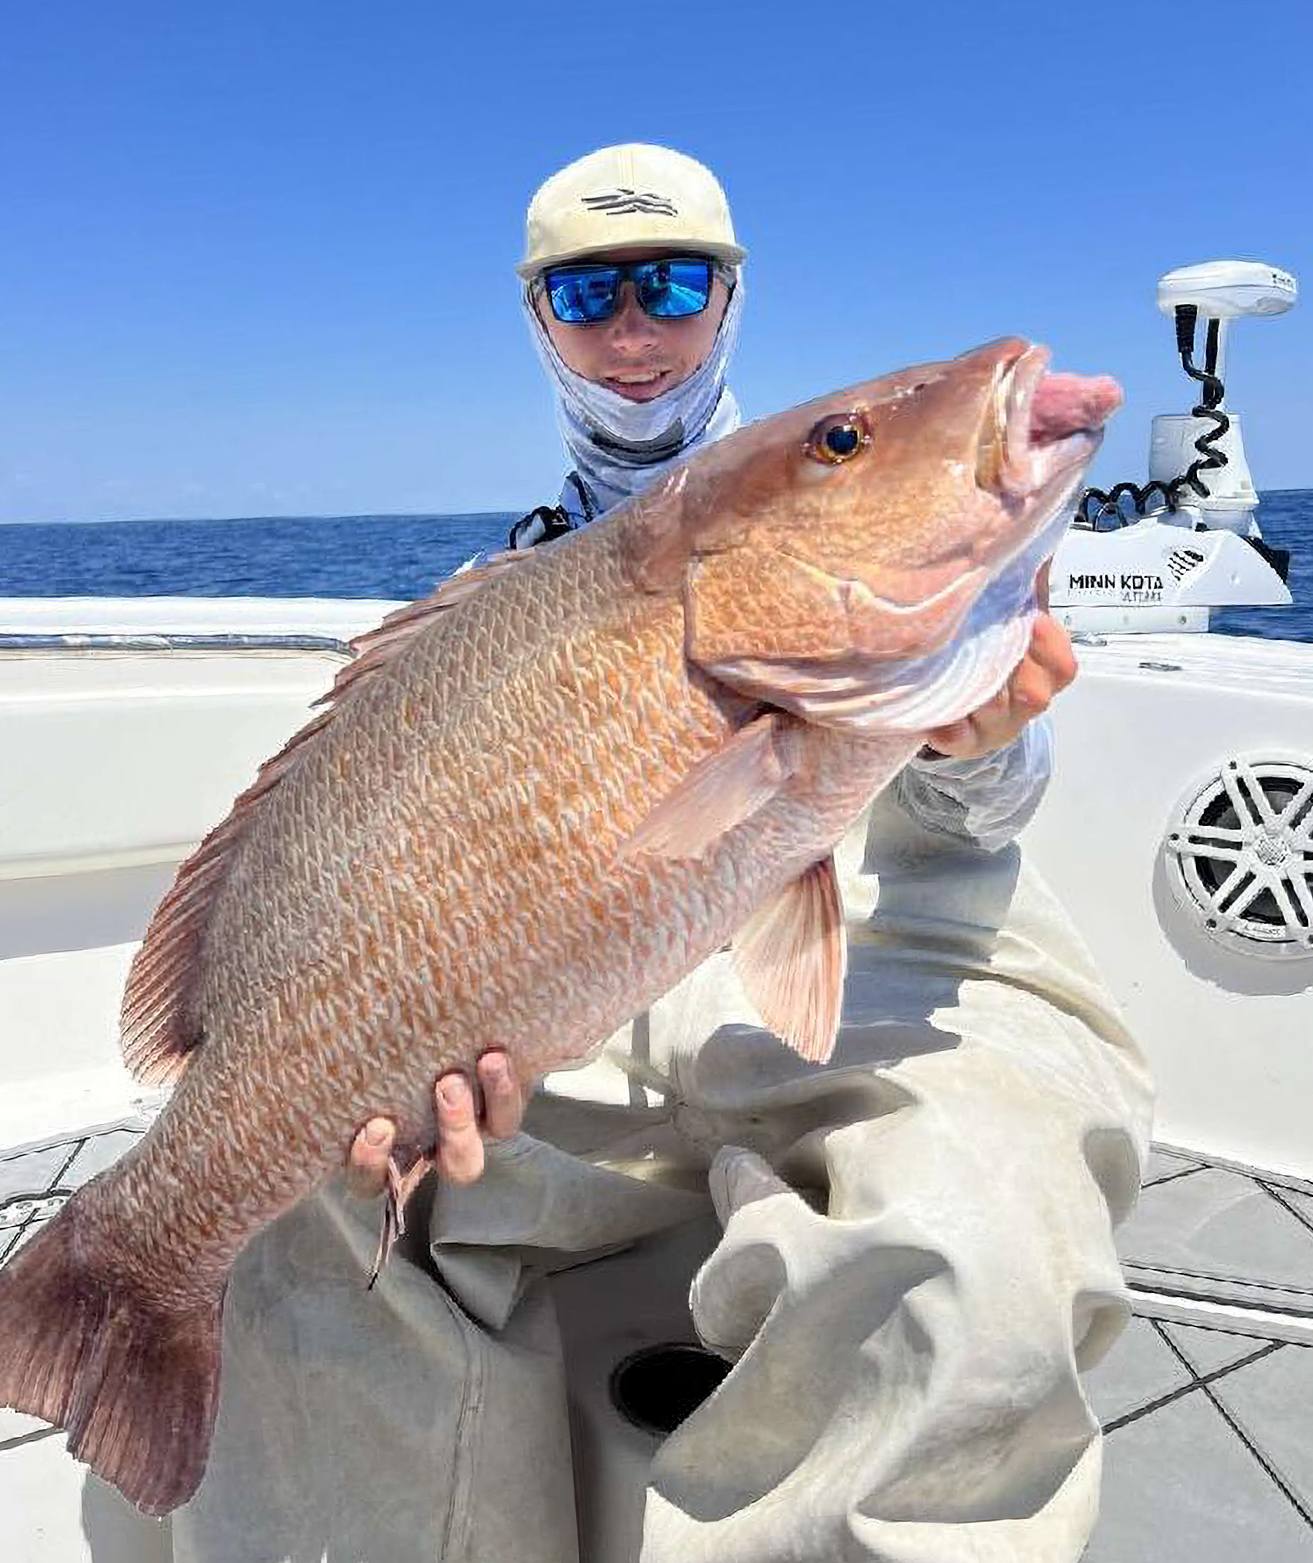 How to Catch Mangrove Snapper - Know the Species